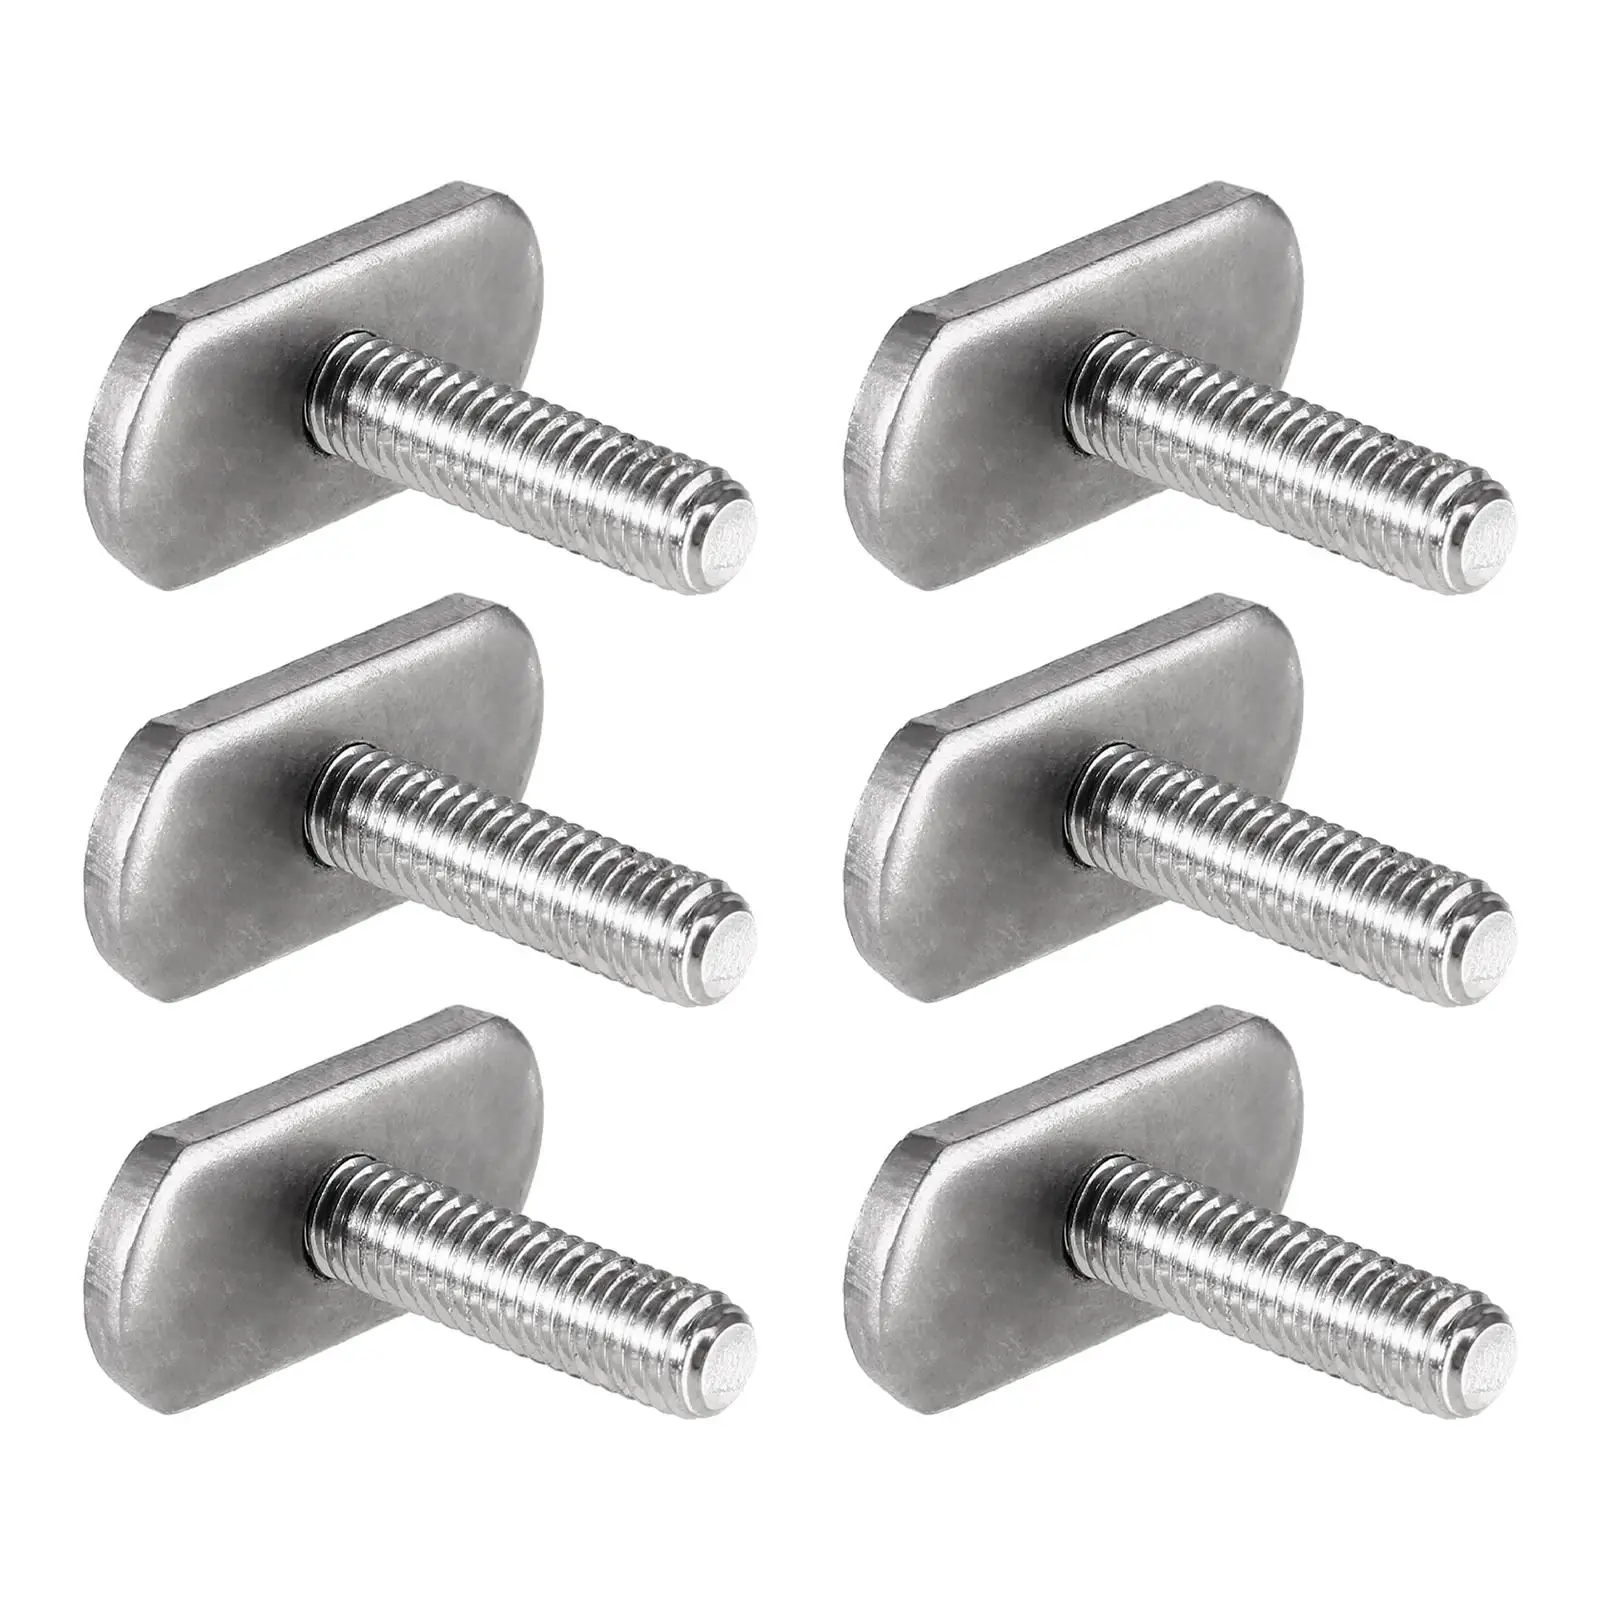 6x Kayak Rail Track Screws Track Nuts Kayak Rail Track Accessories T Bolts Rails Bolts for Canoes Watercraft Boats Rails Rowing